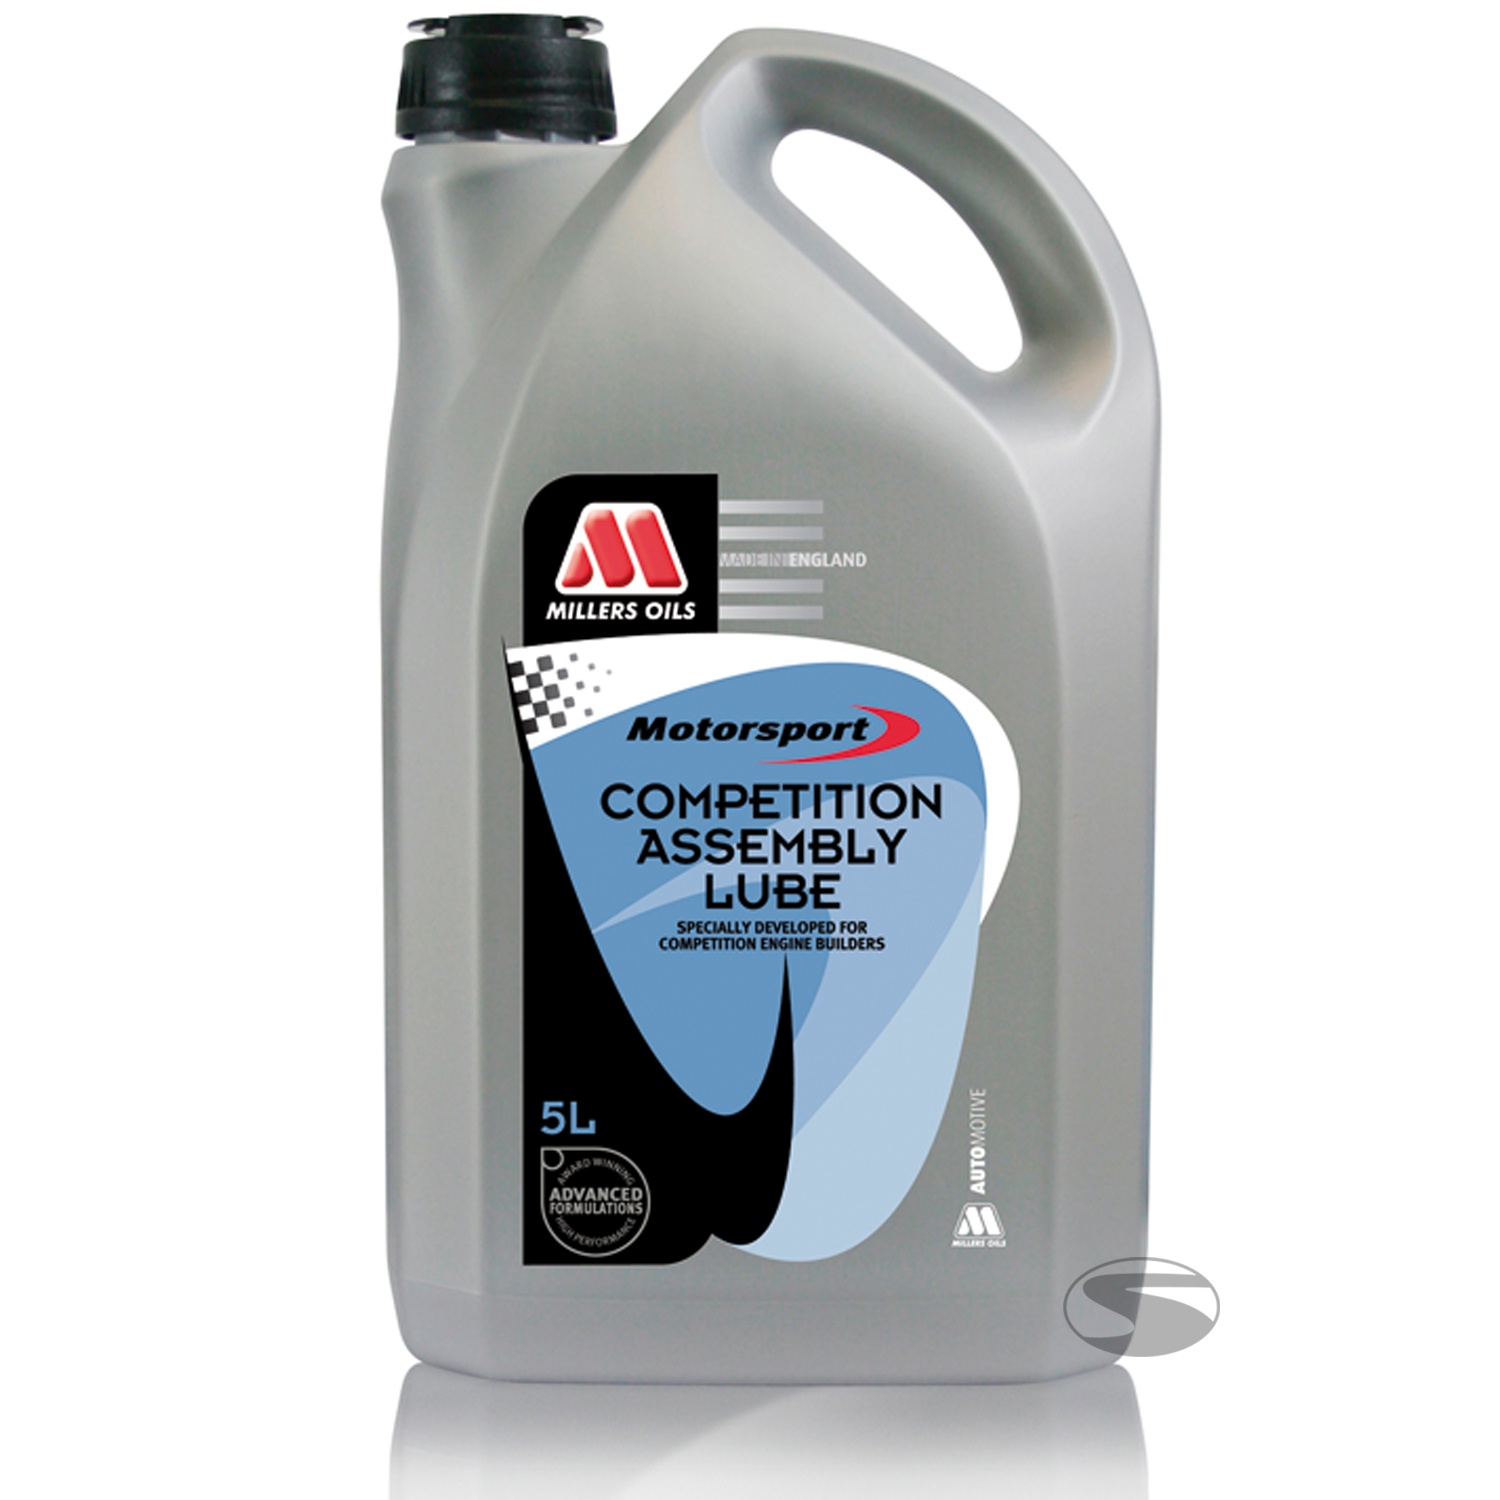 Millers Oils Competition Assembly Lube, 5 Liter